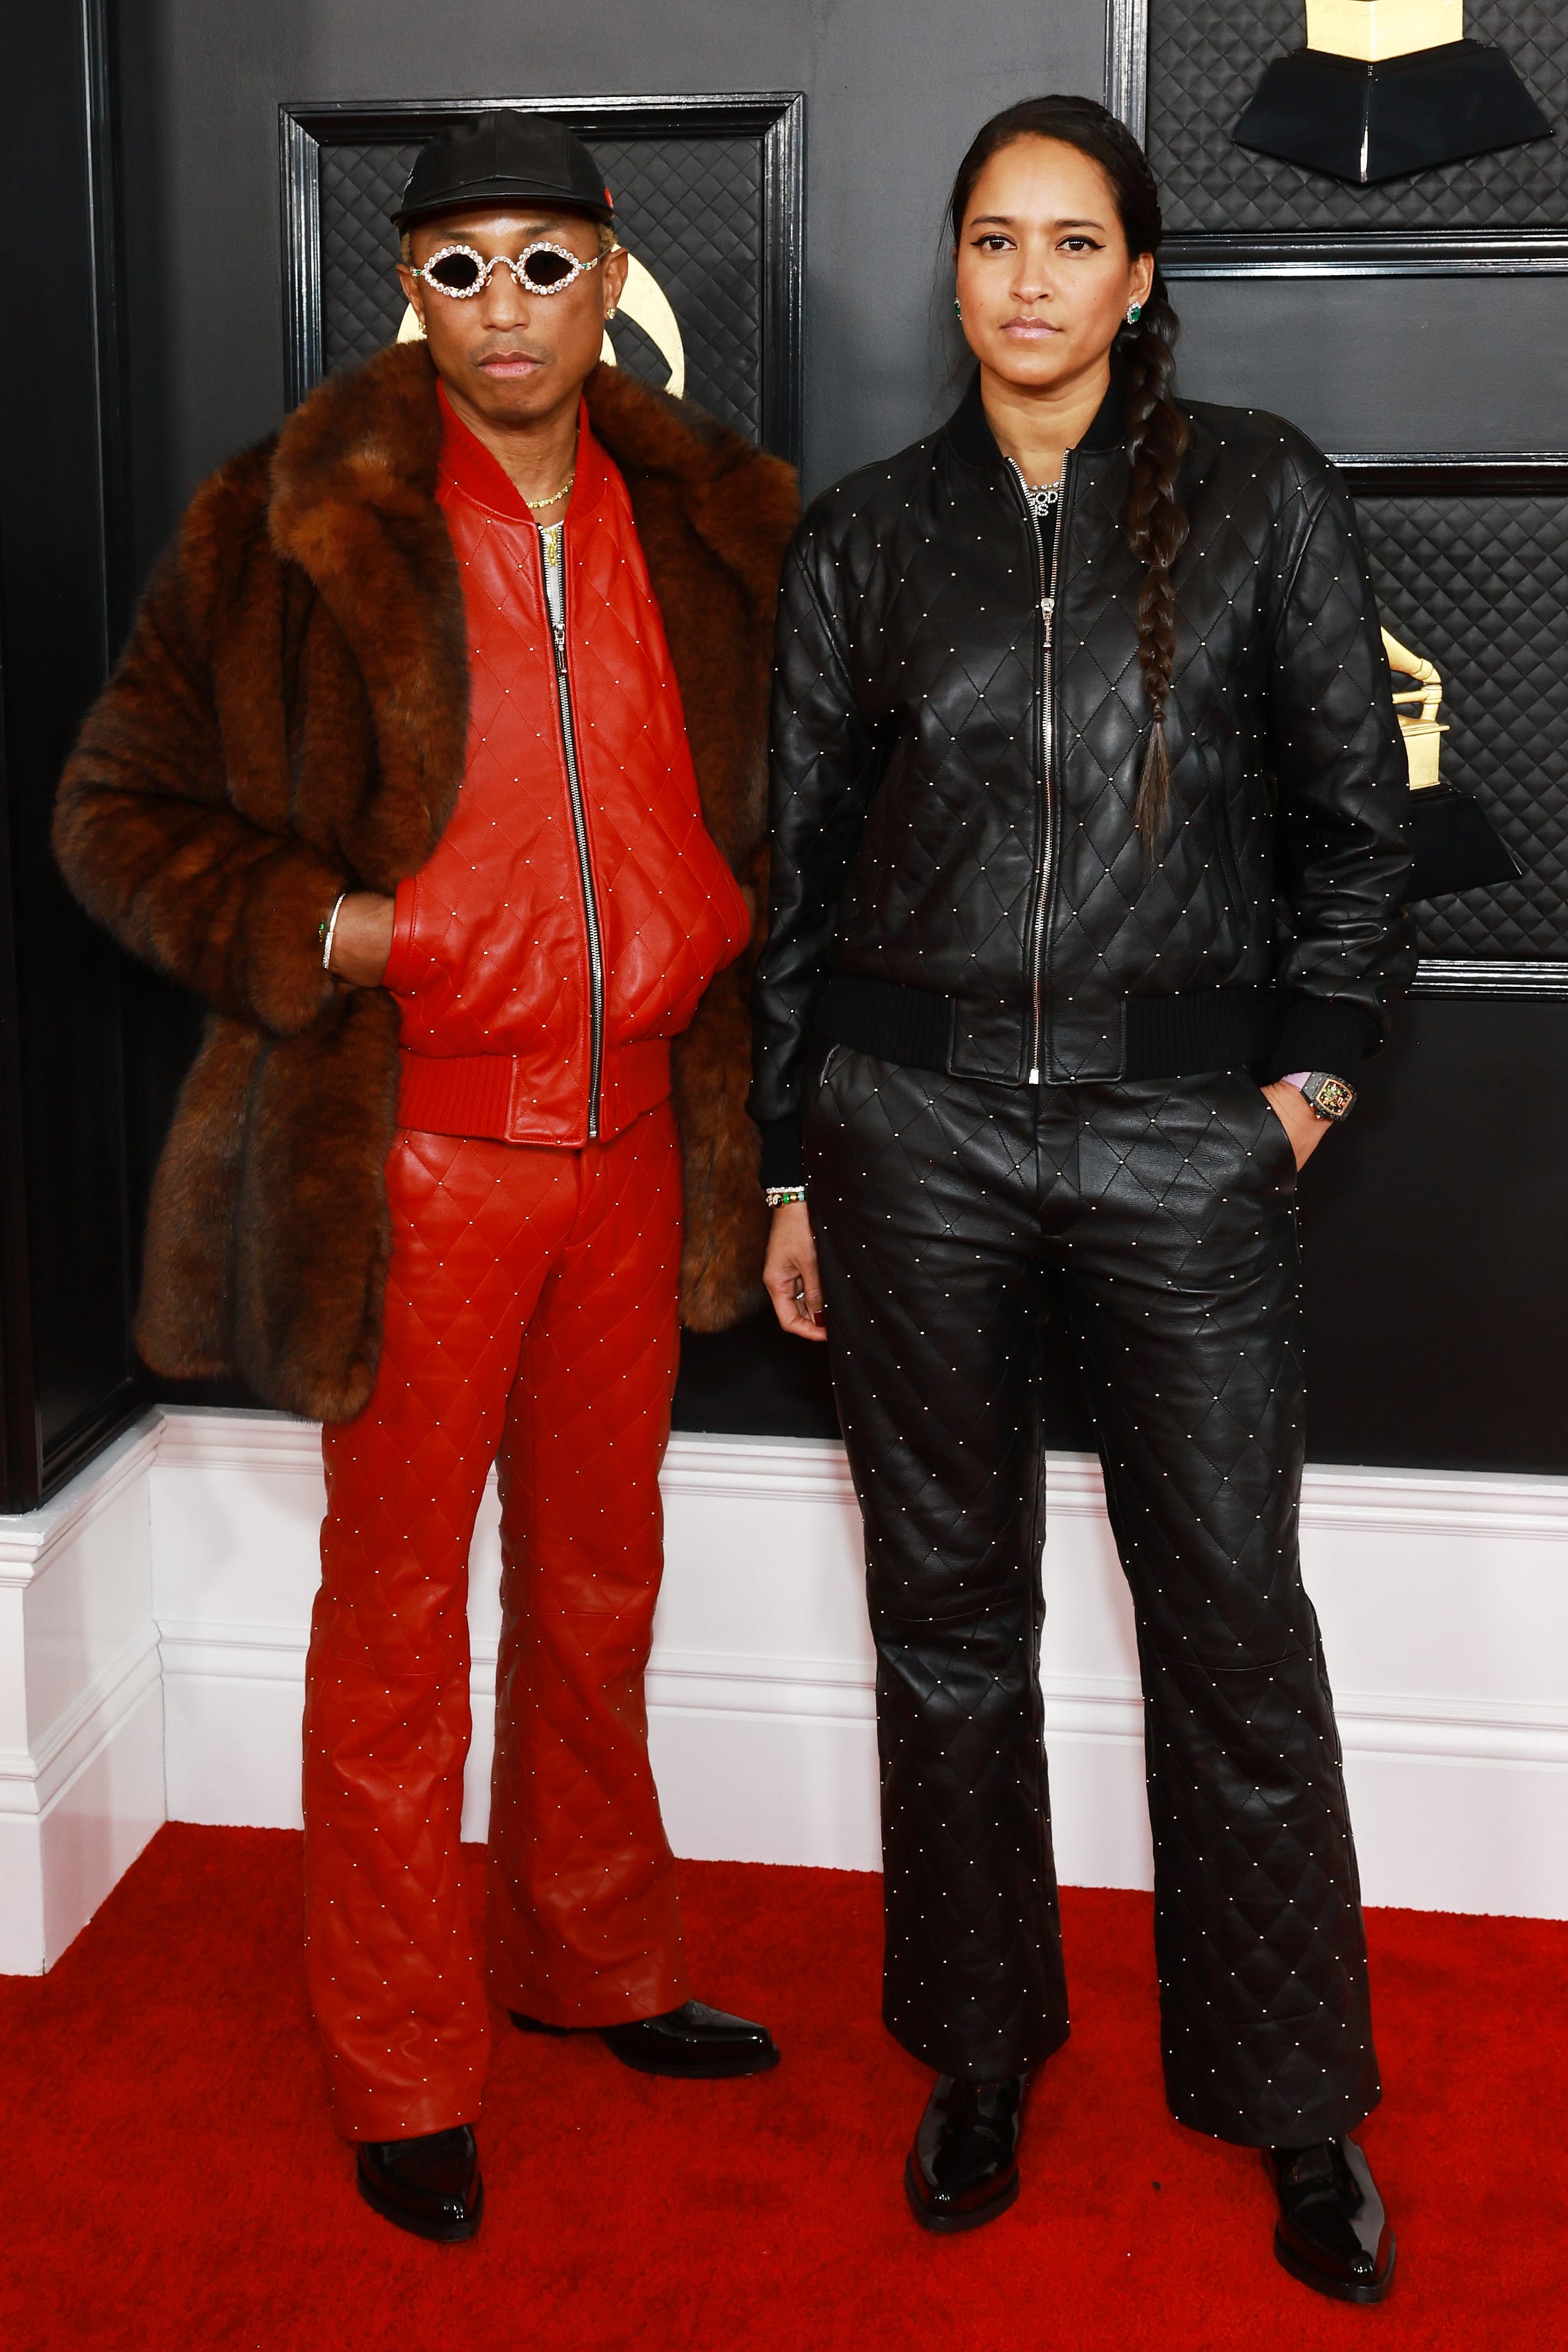 Pharrell Williams and Helen Lasichanh at the 2023 Grammys